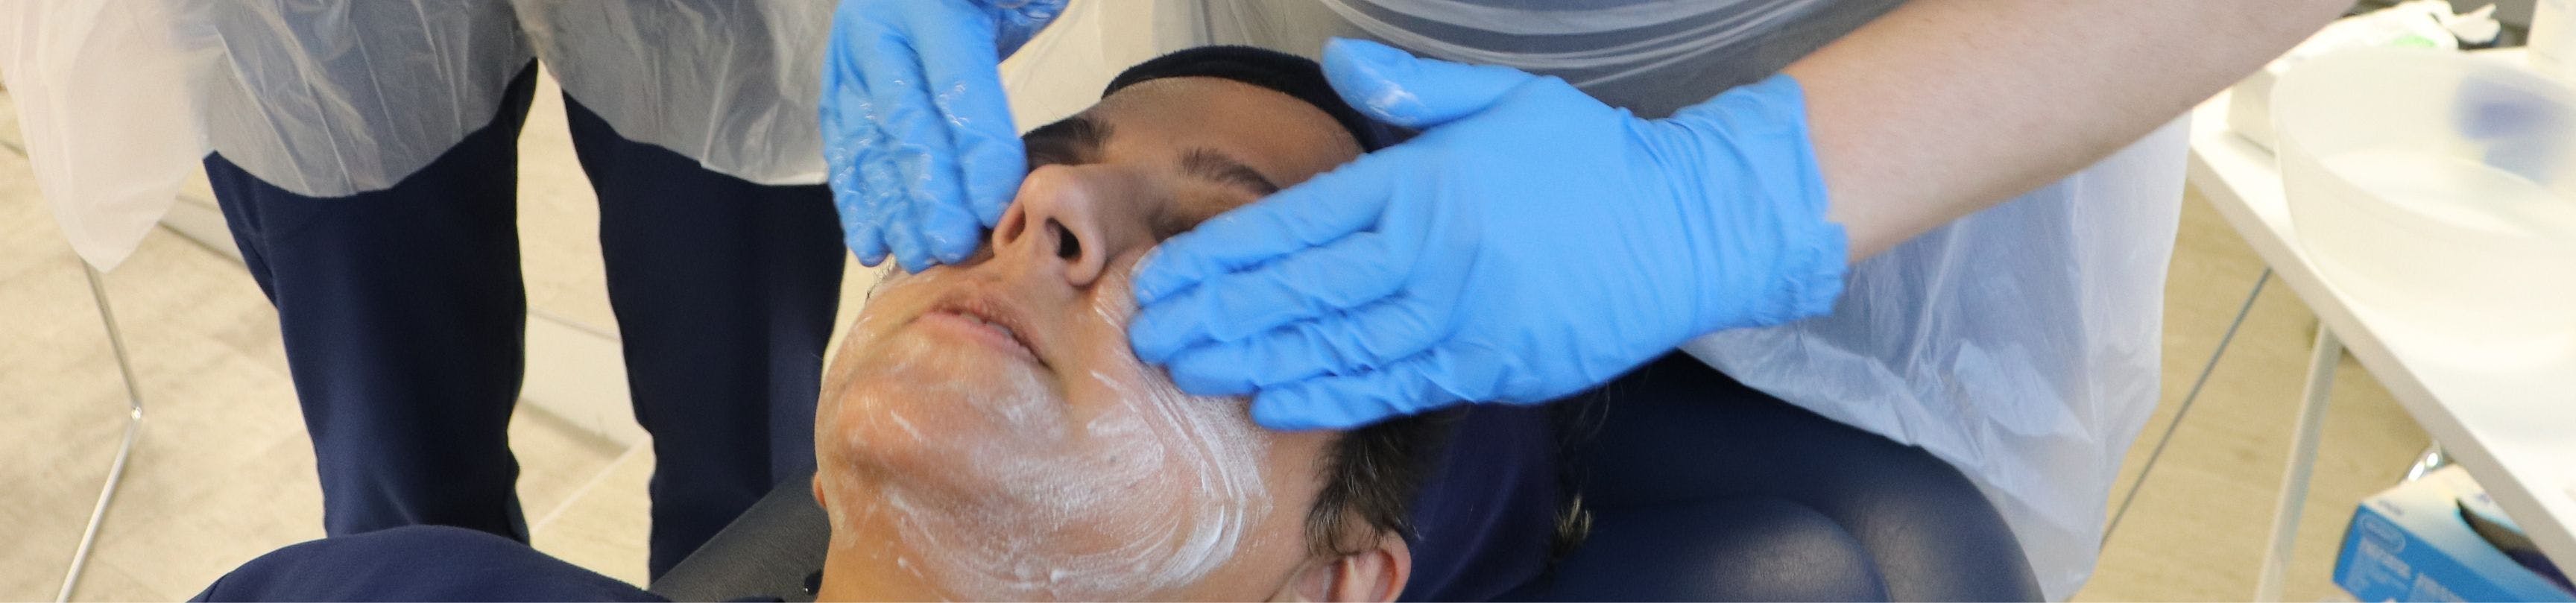 Cosmetic Dermatology Course chemical peel training